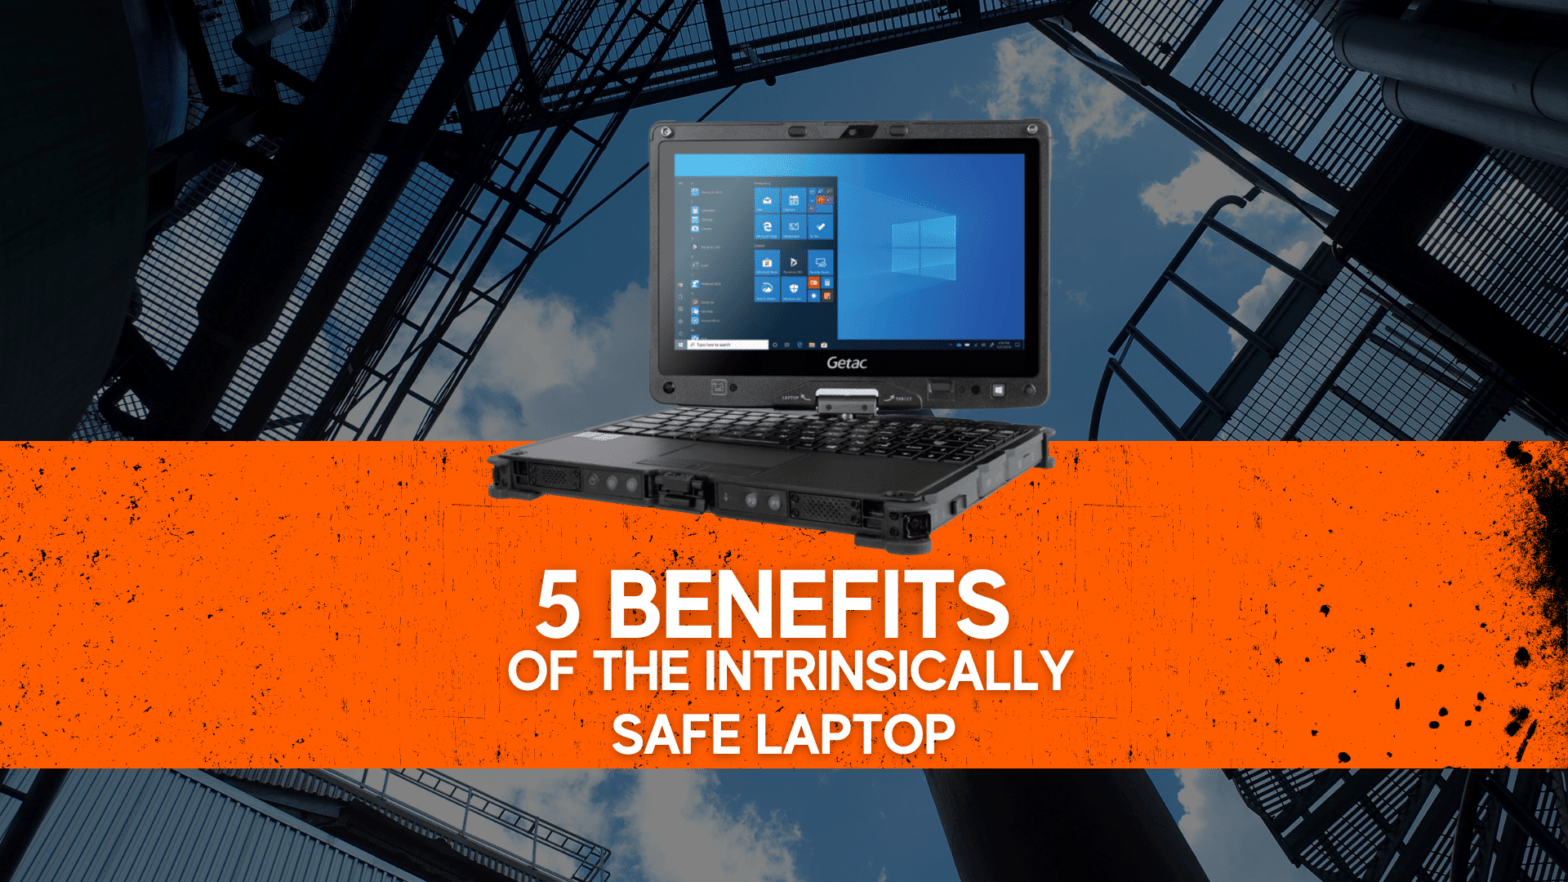 5 Benefits of the Intrinsically Safe Laptop